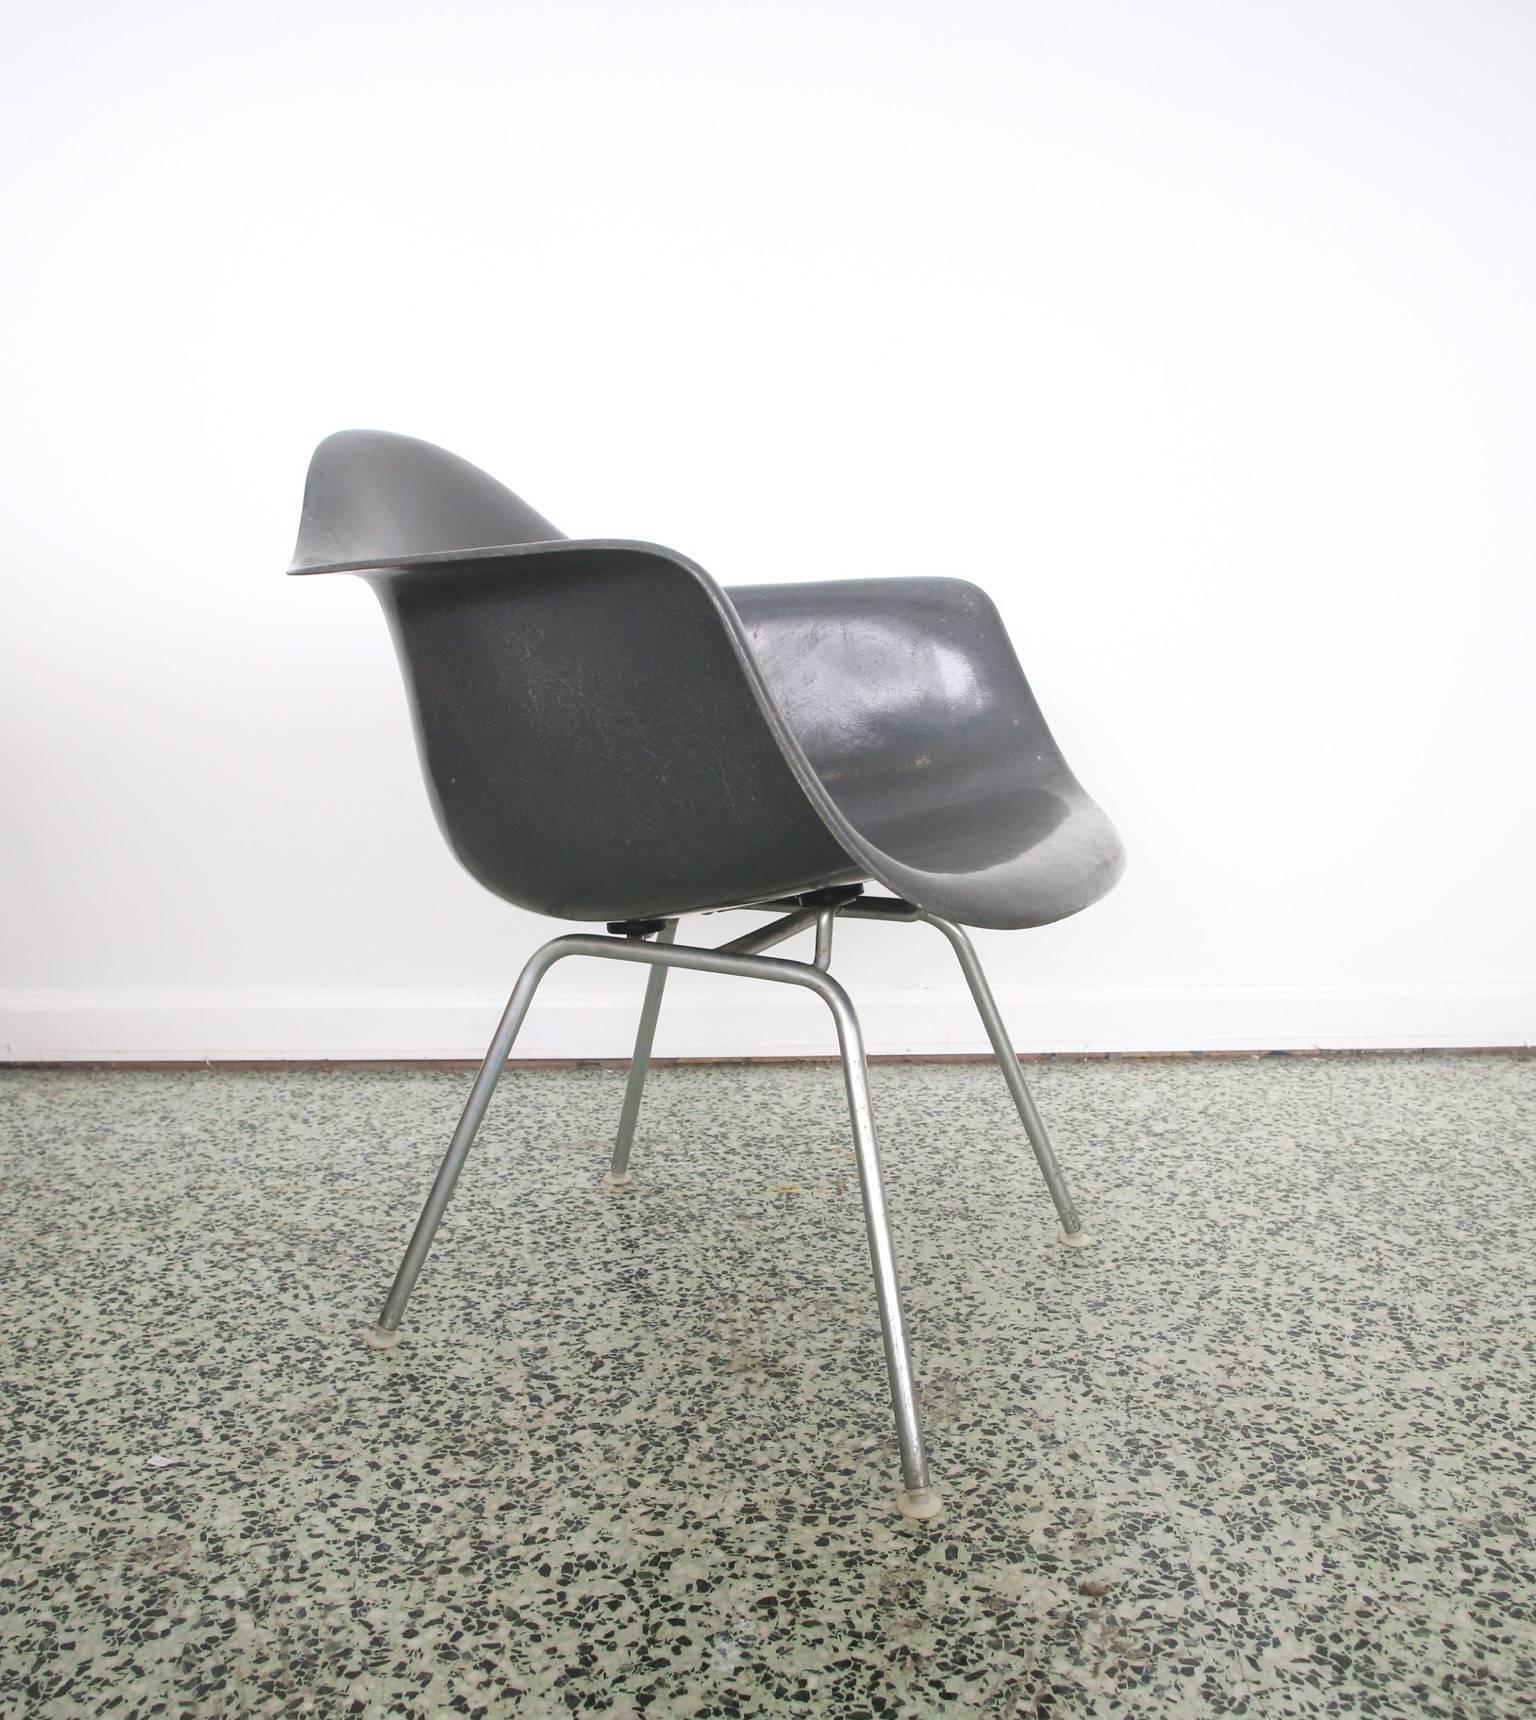 Designer: Charles Ray Eames.
Manufacturer: Herman Miller.
Period/style: Mid-Century Modern.
Country: United States.
Date: 1960s.

Low H-base.